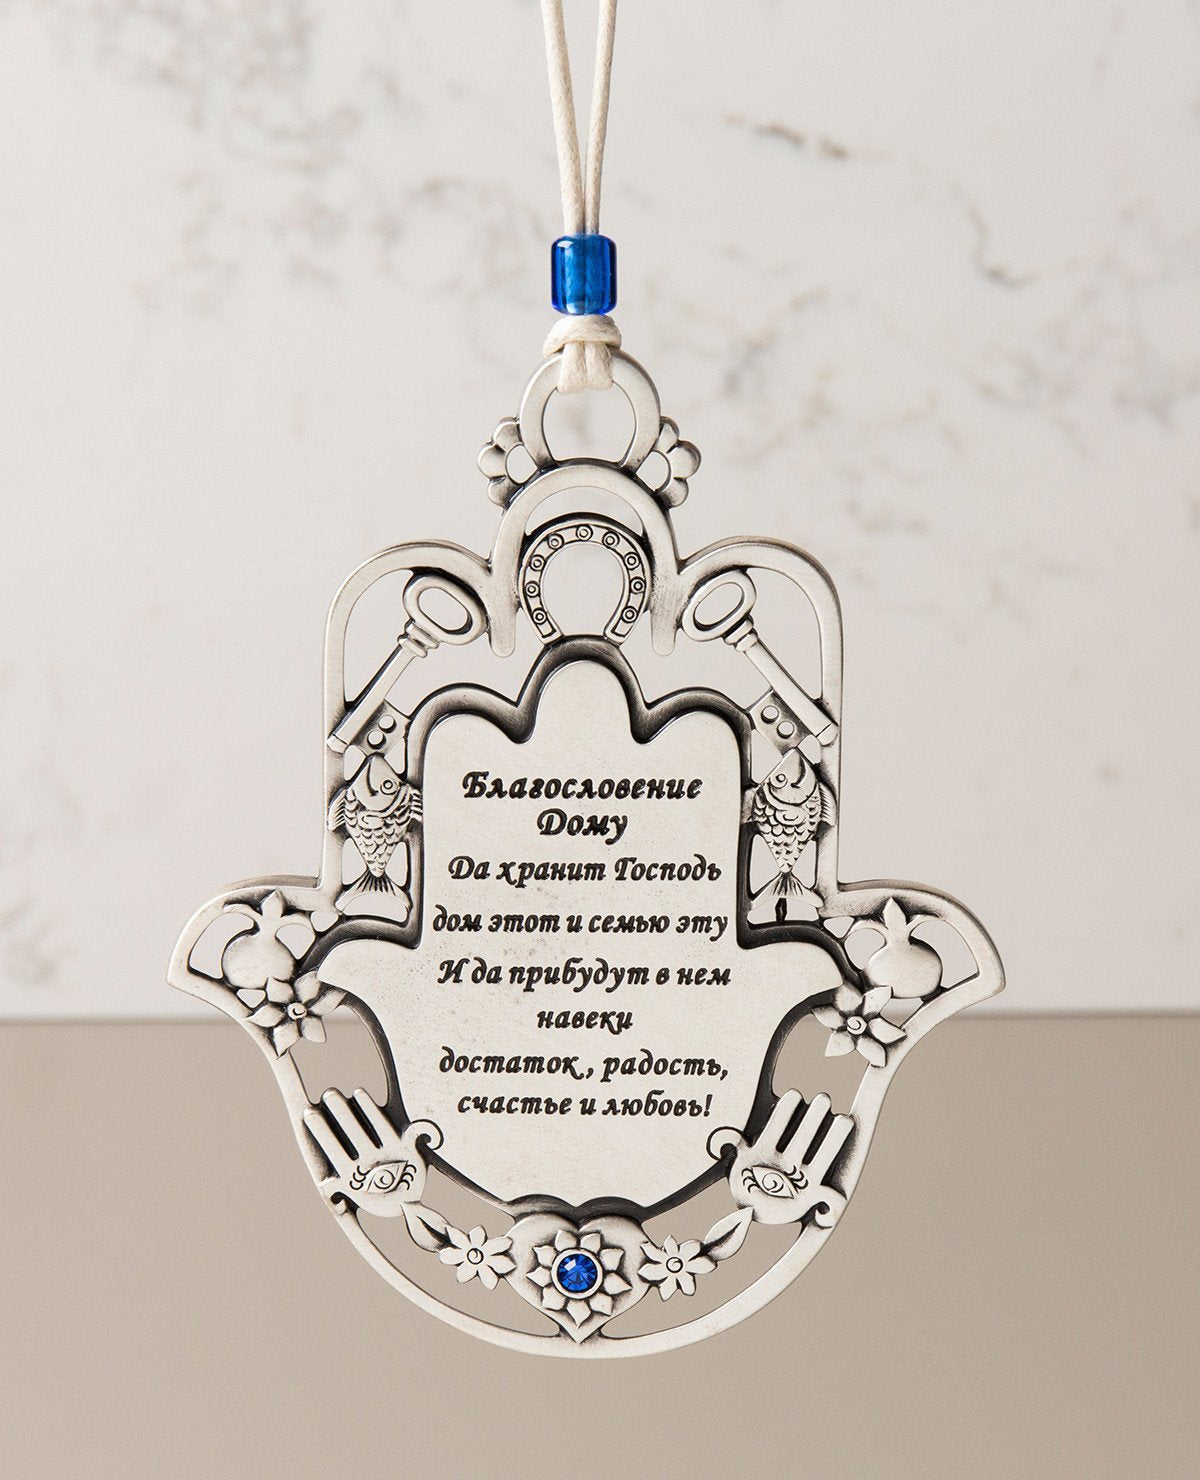 An impressive and exceptionally designed hanging Home Blessing. Shaped like a Hamsa and decorated by motifs such as a key, a fish, a horseshoe and a pomegranate, which according to Judaism symbolize respectively: a new way, fertility, luck and abundance. The ornament is coated in sterling silver, embedded with blue Swarovski crystals and comes with a faux leather string for hanging, decorated with a blue bead. A fantastic gift to grant any new home. Great for new beginnings, or for anyone you wish to greet 